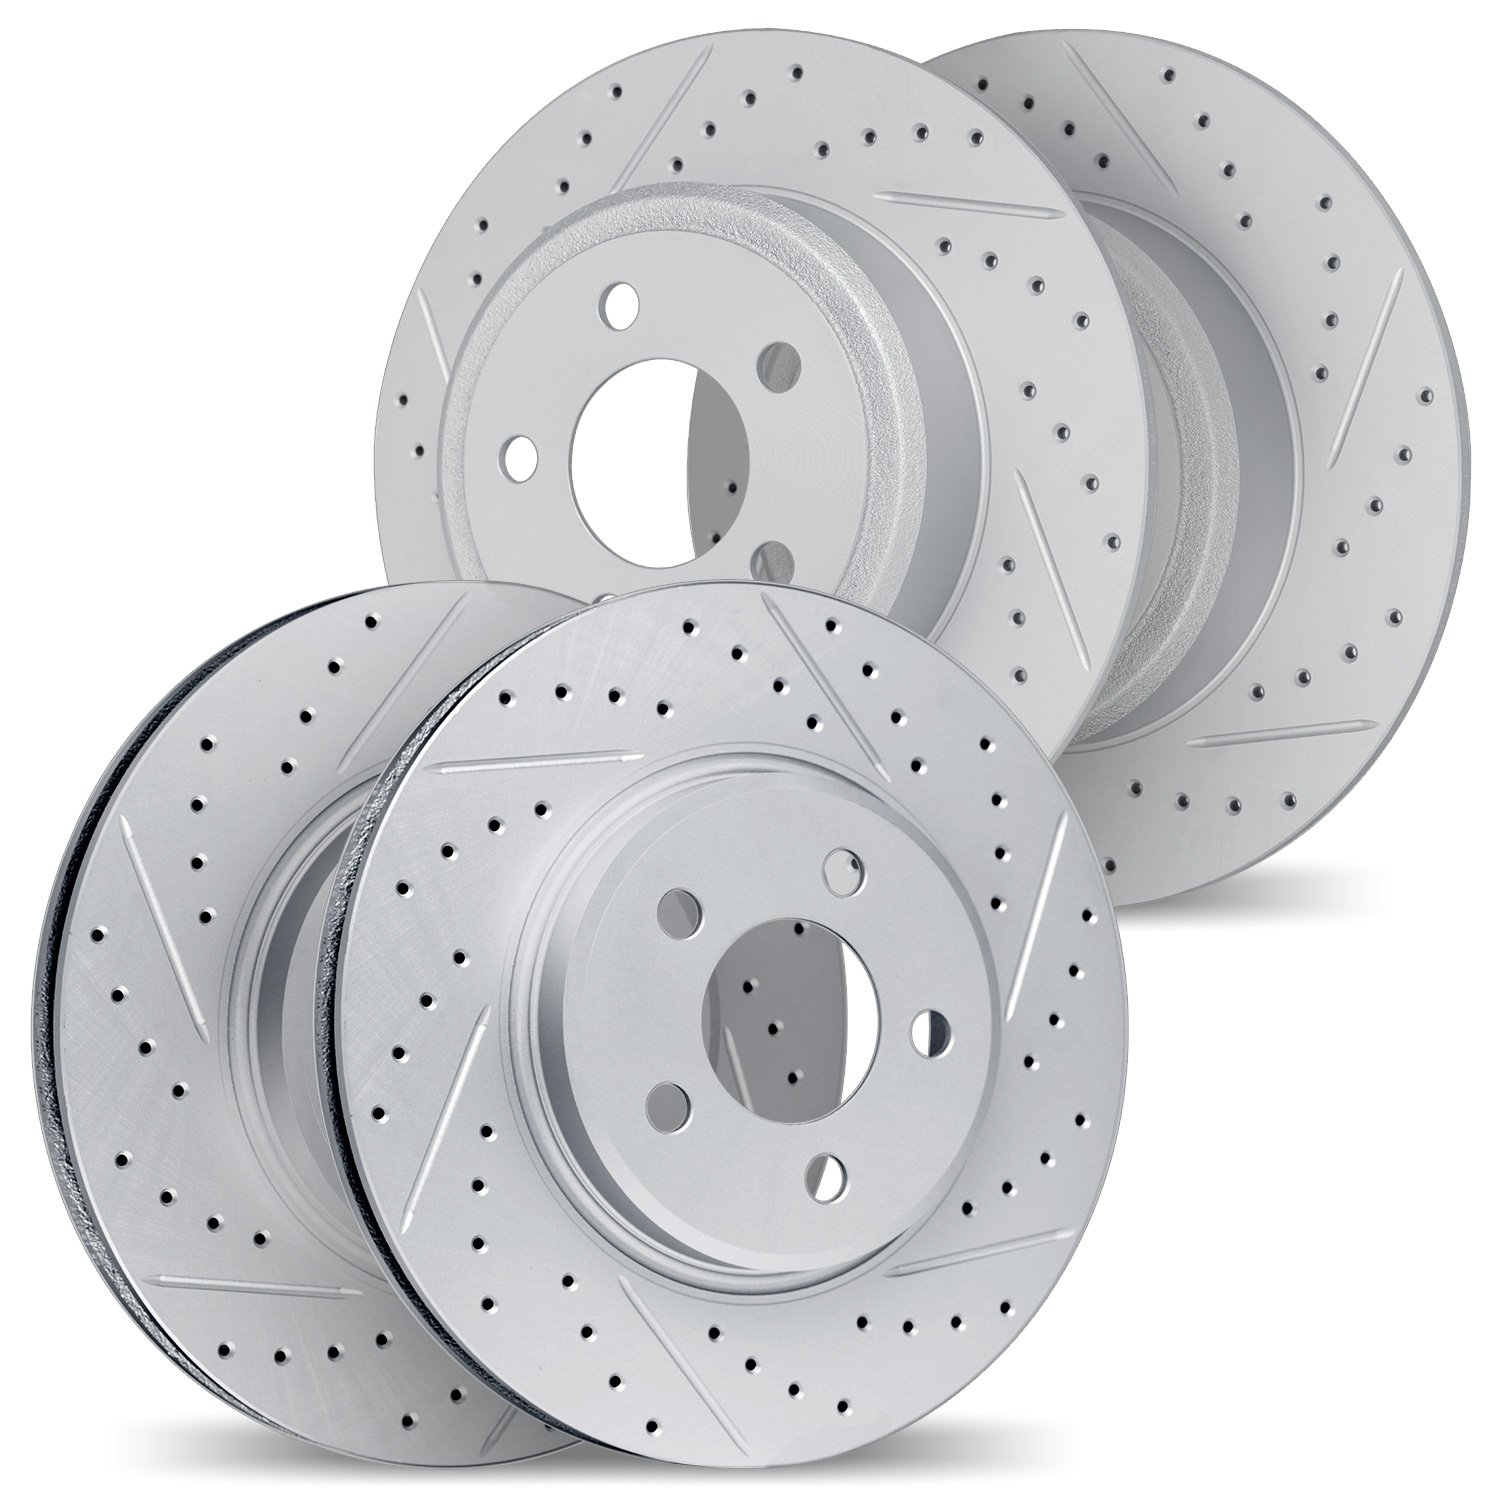 2004-53000 Geoperformance Drilled/Slotted Brake Rotors, 2002-2008 GM, Position: Front and Rear